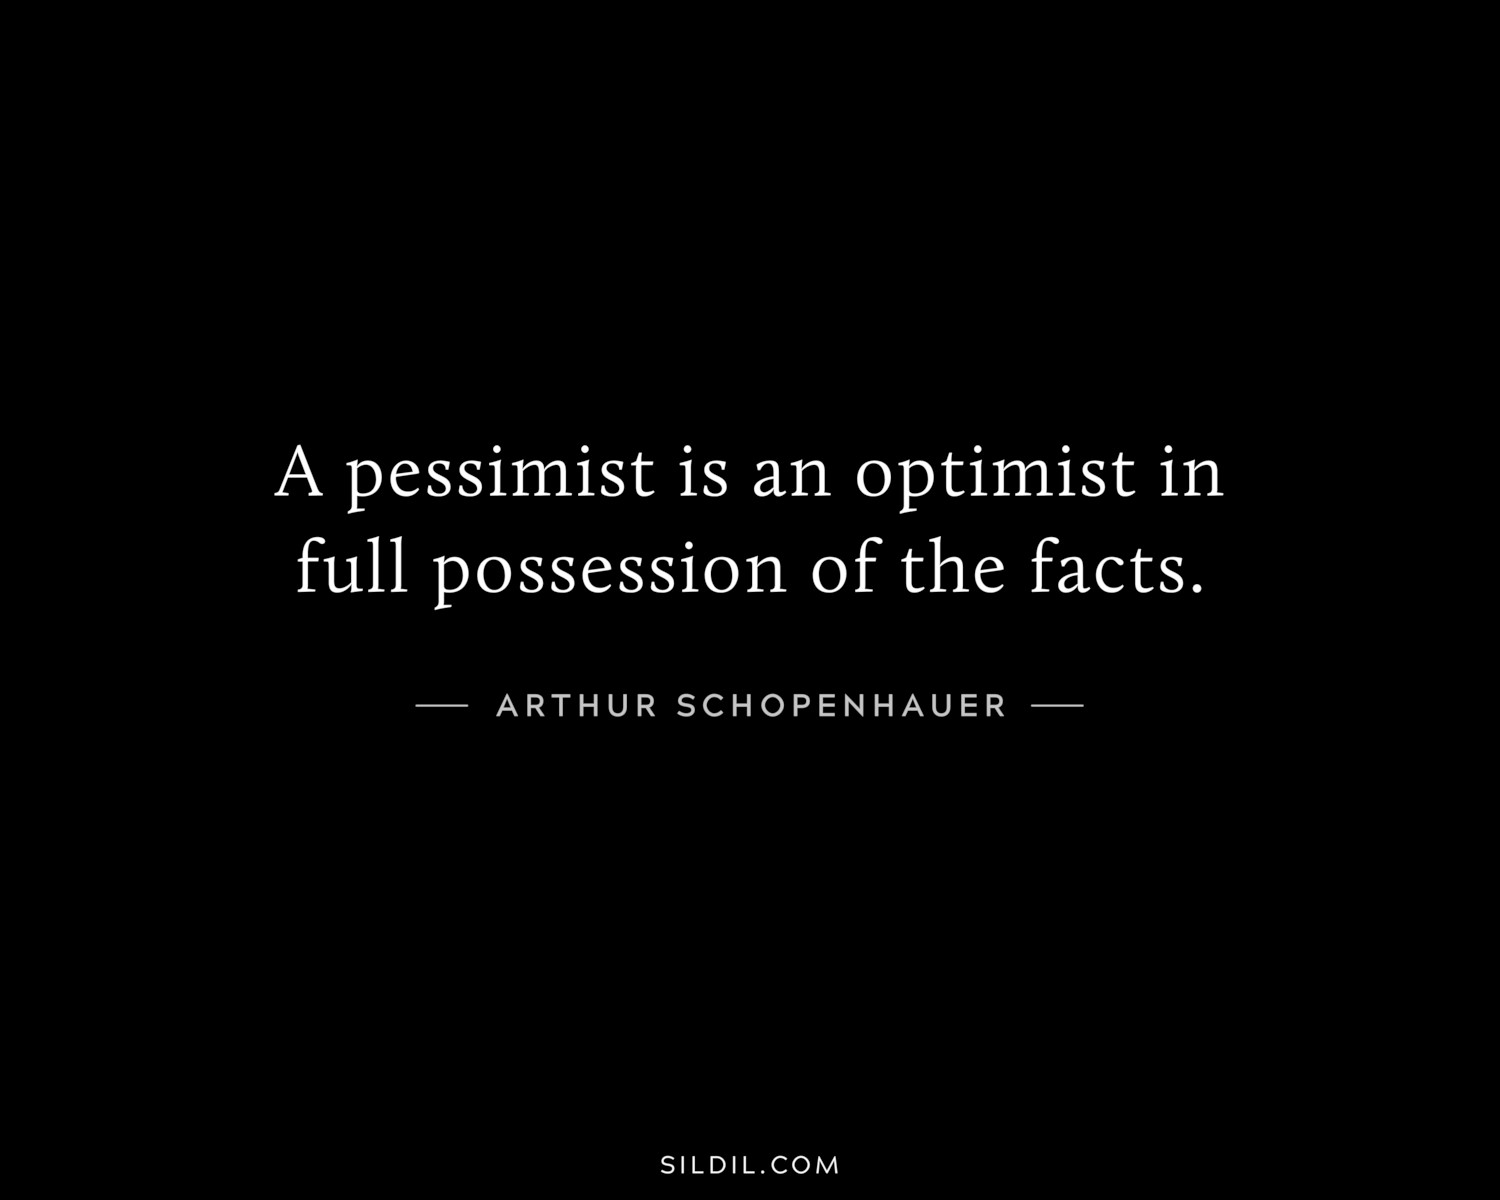 A pessimist is an optimist in full possession of the facts.